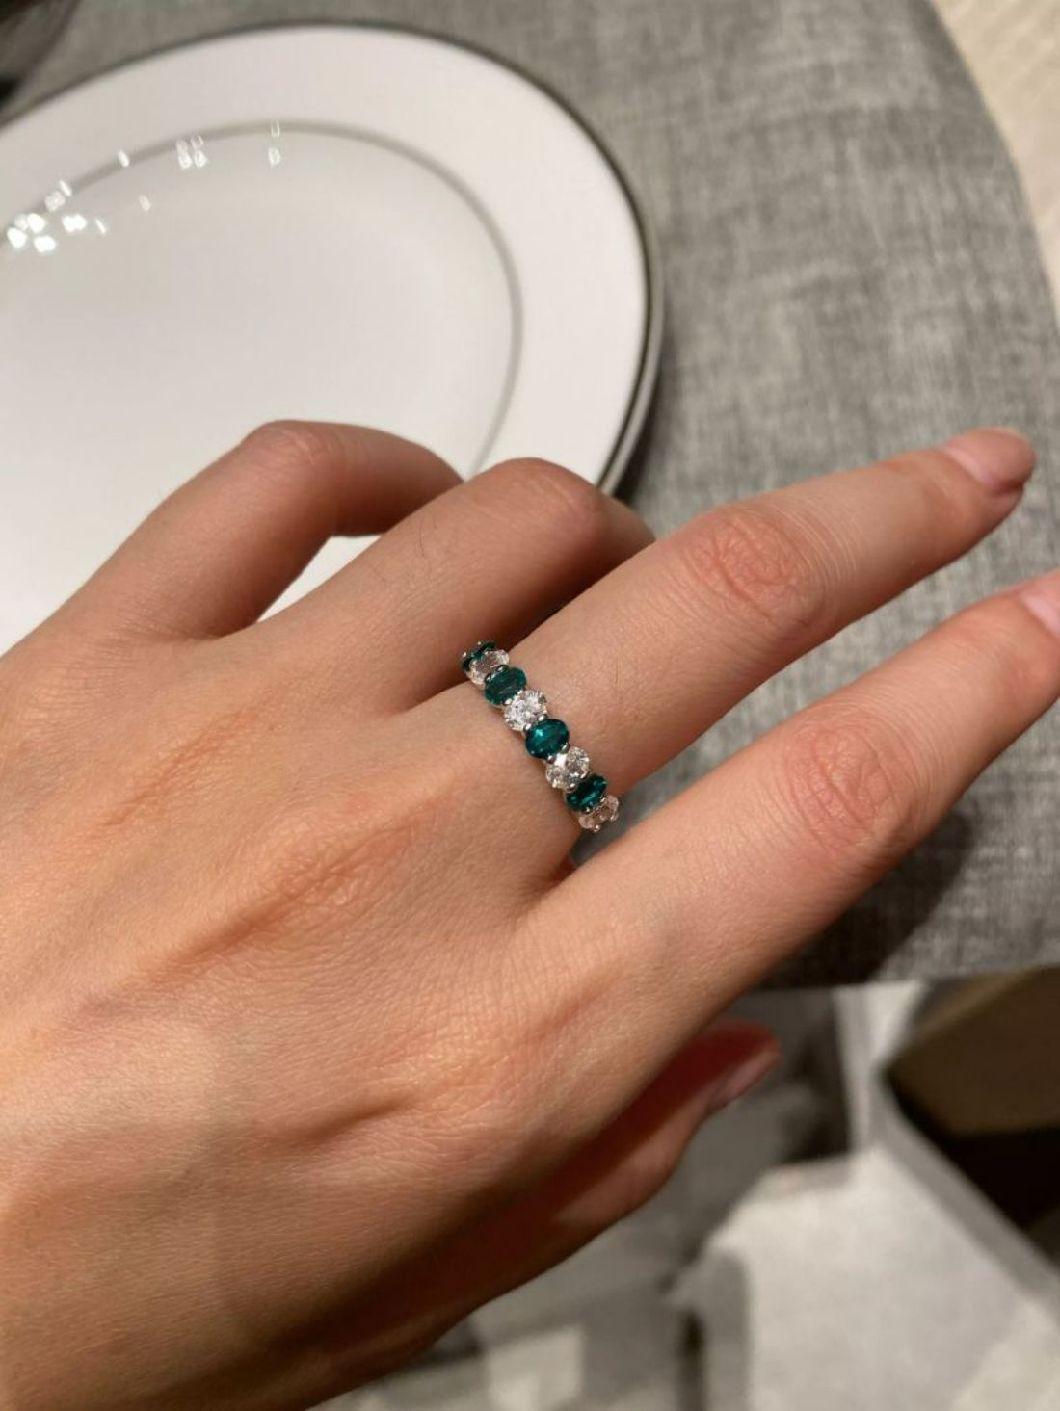 China Wholesale Silver Jewelry 925 Sterling Silver Row Band Ring with Emerald Rings